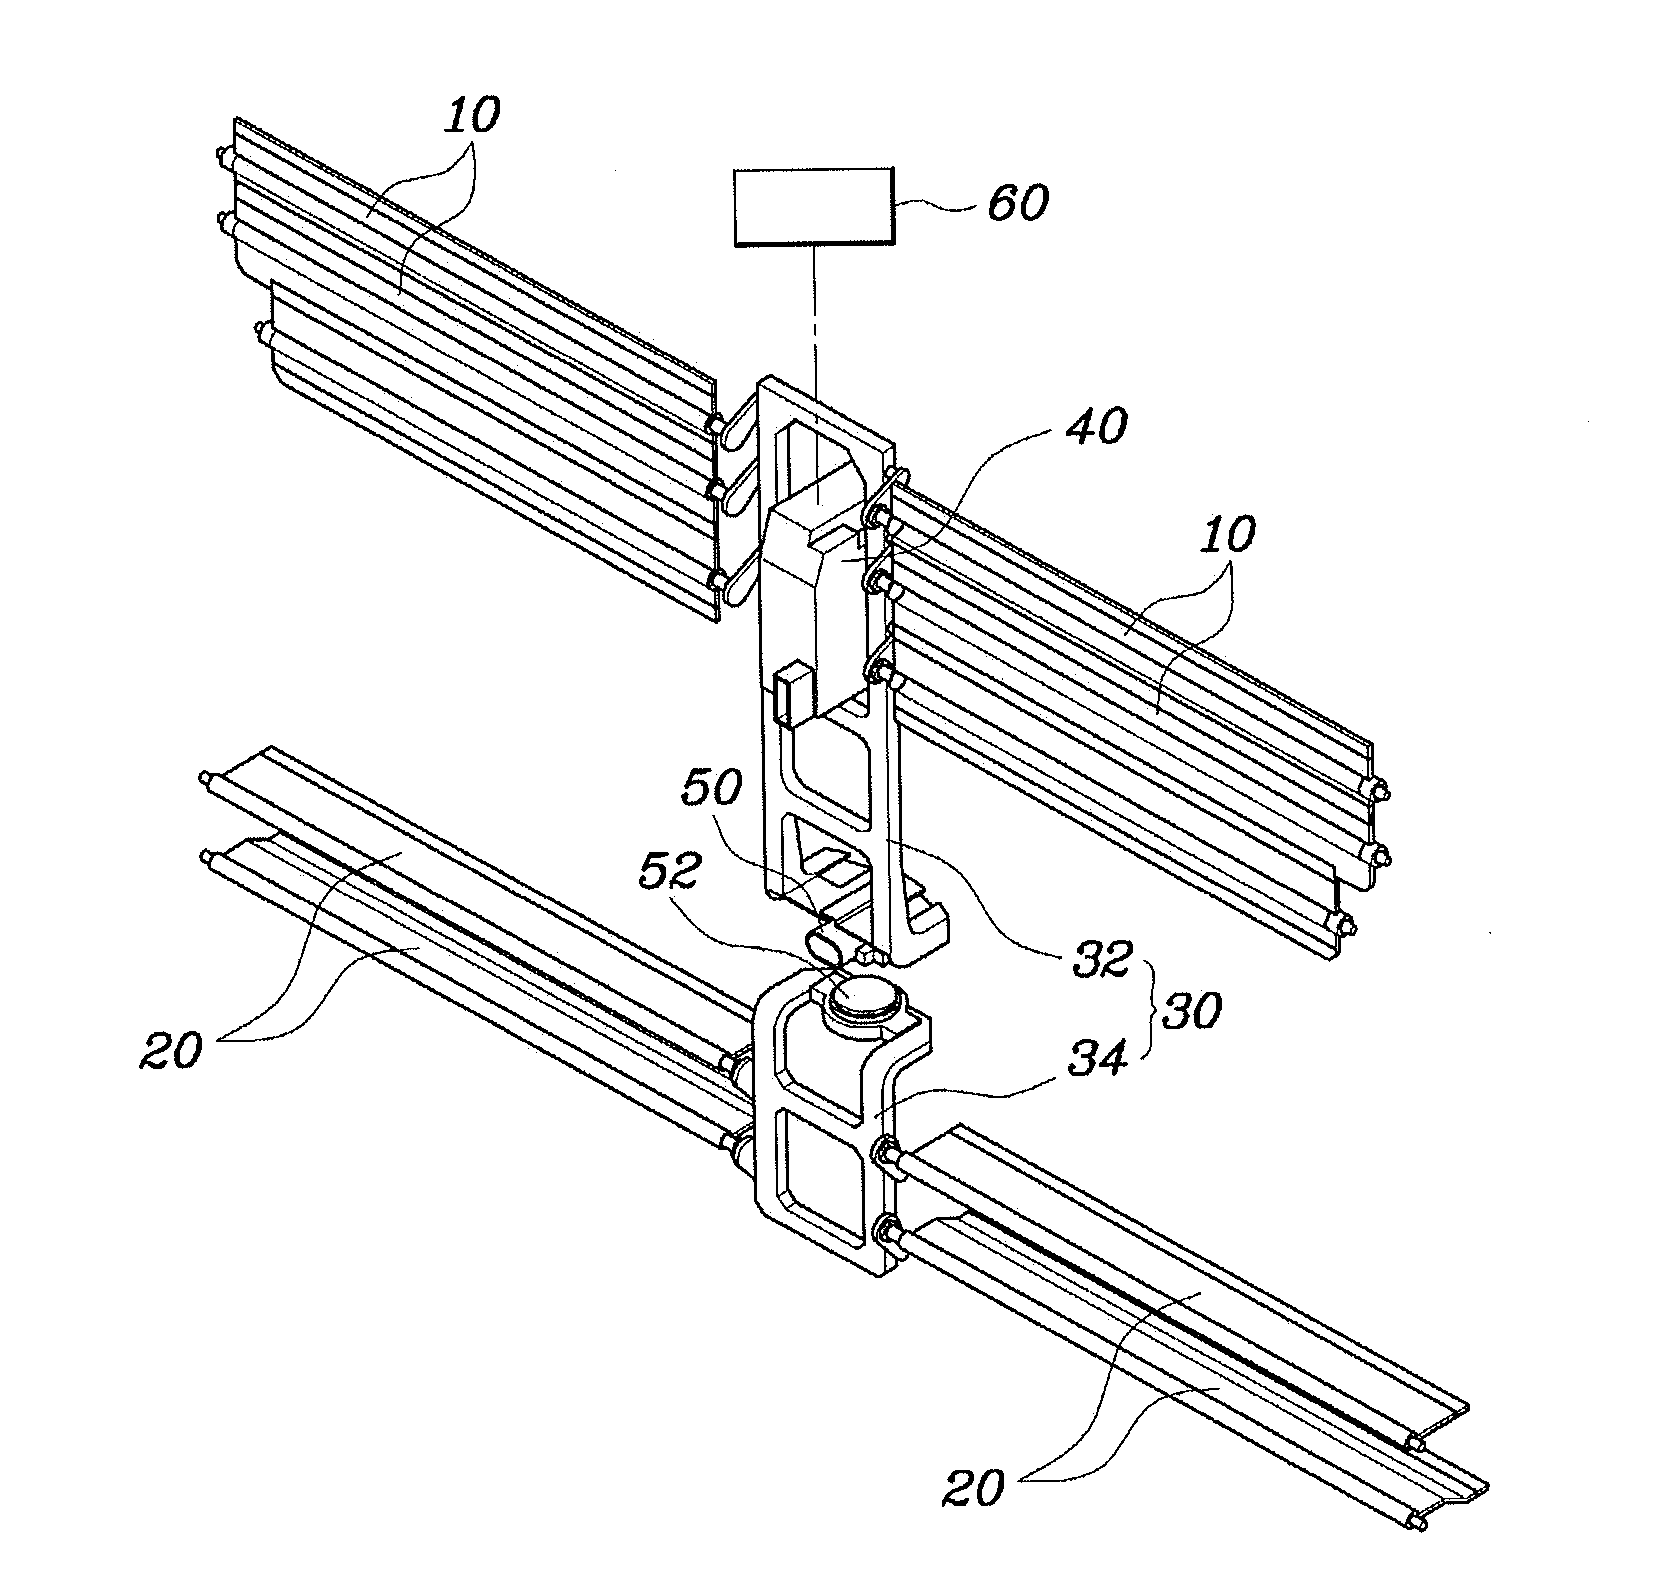 Active air flap device for vehicles